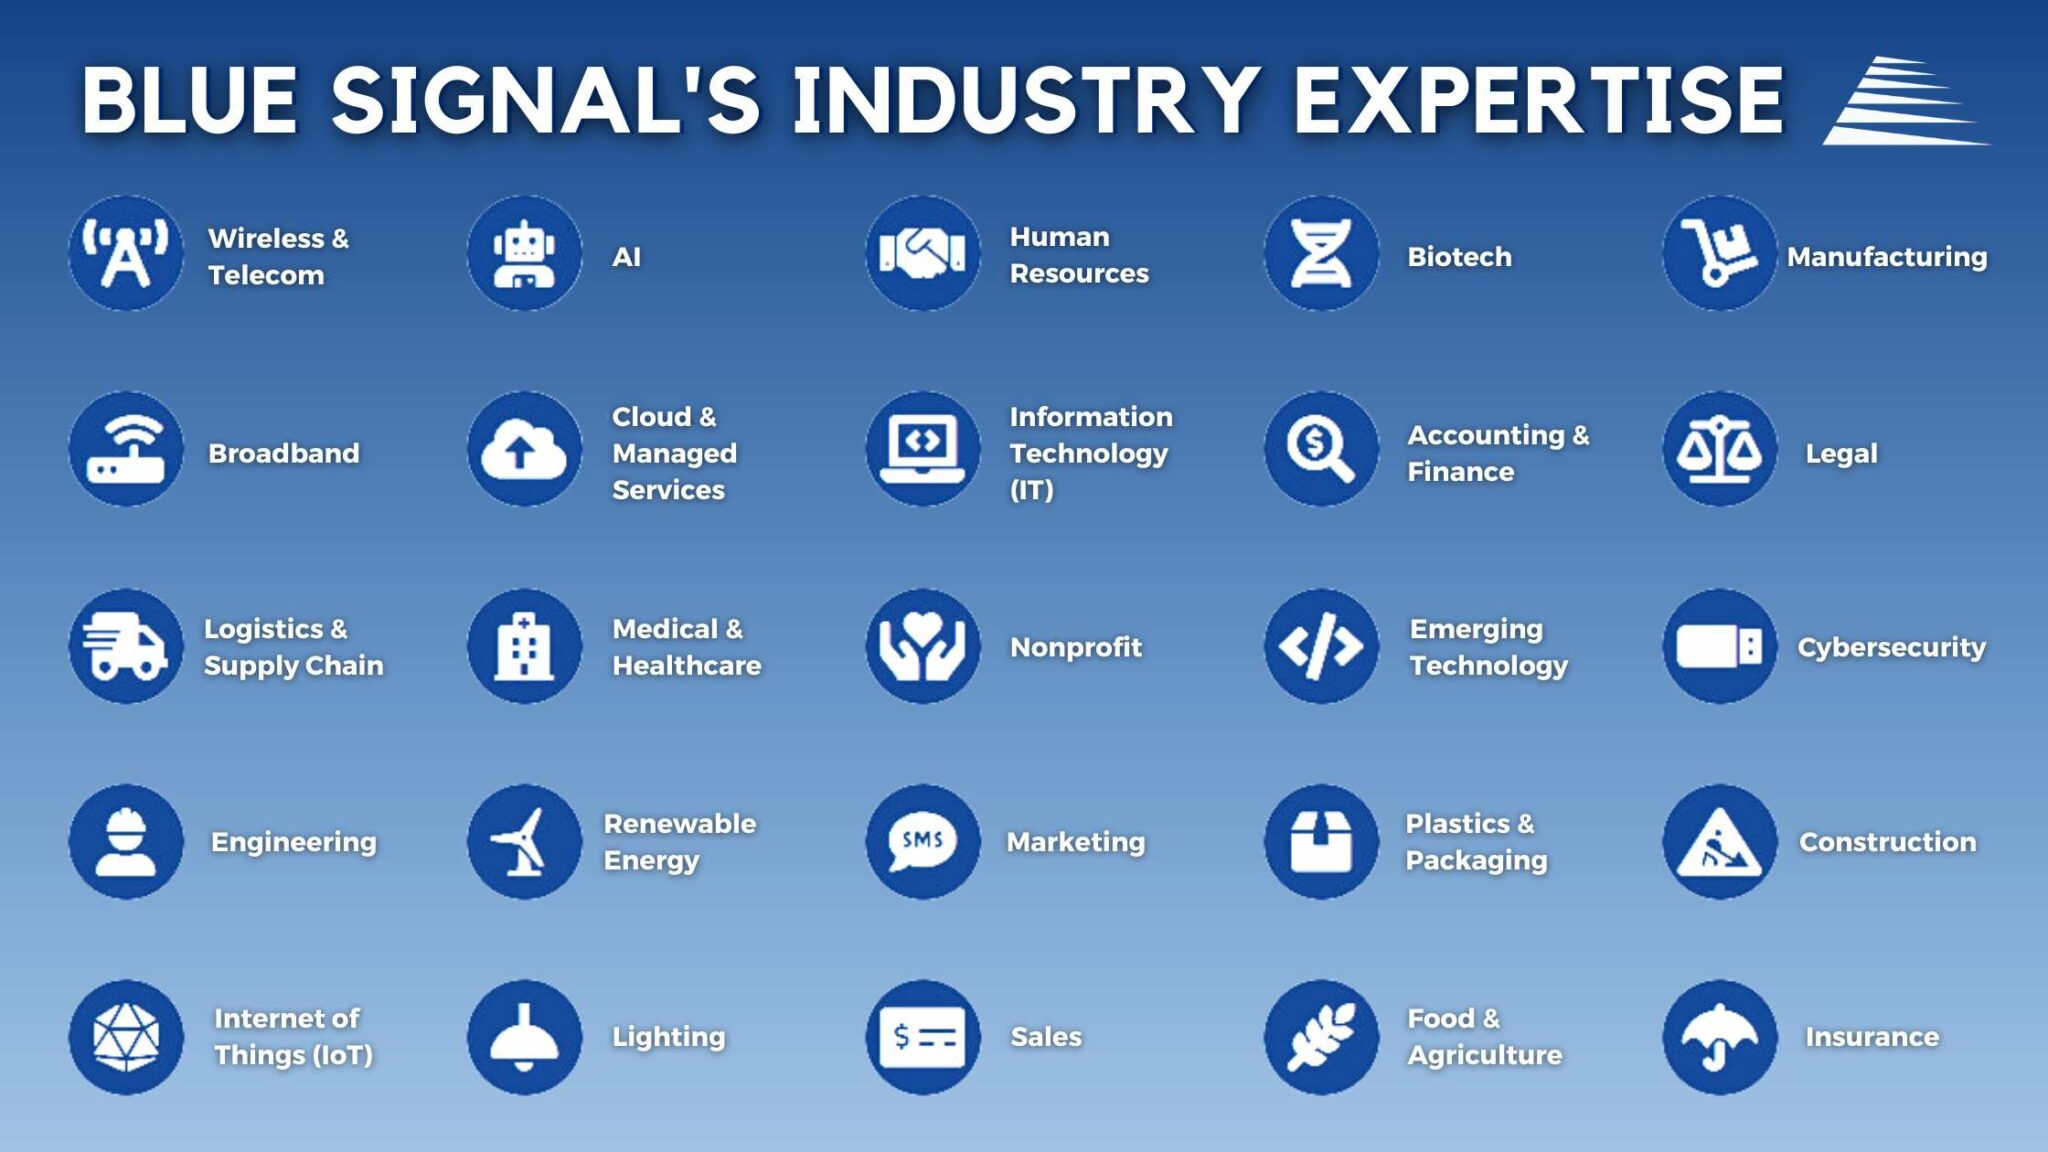 A list of icons showcasing Blue Signal's industry expertise in areas such as Wireless & Telecom, Emerging Technology, Manufacturing, Construction, Renewable Energy, and more.